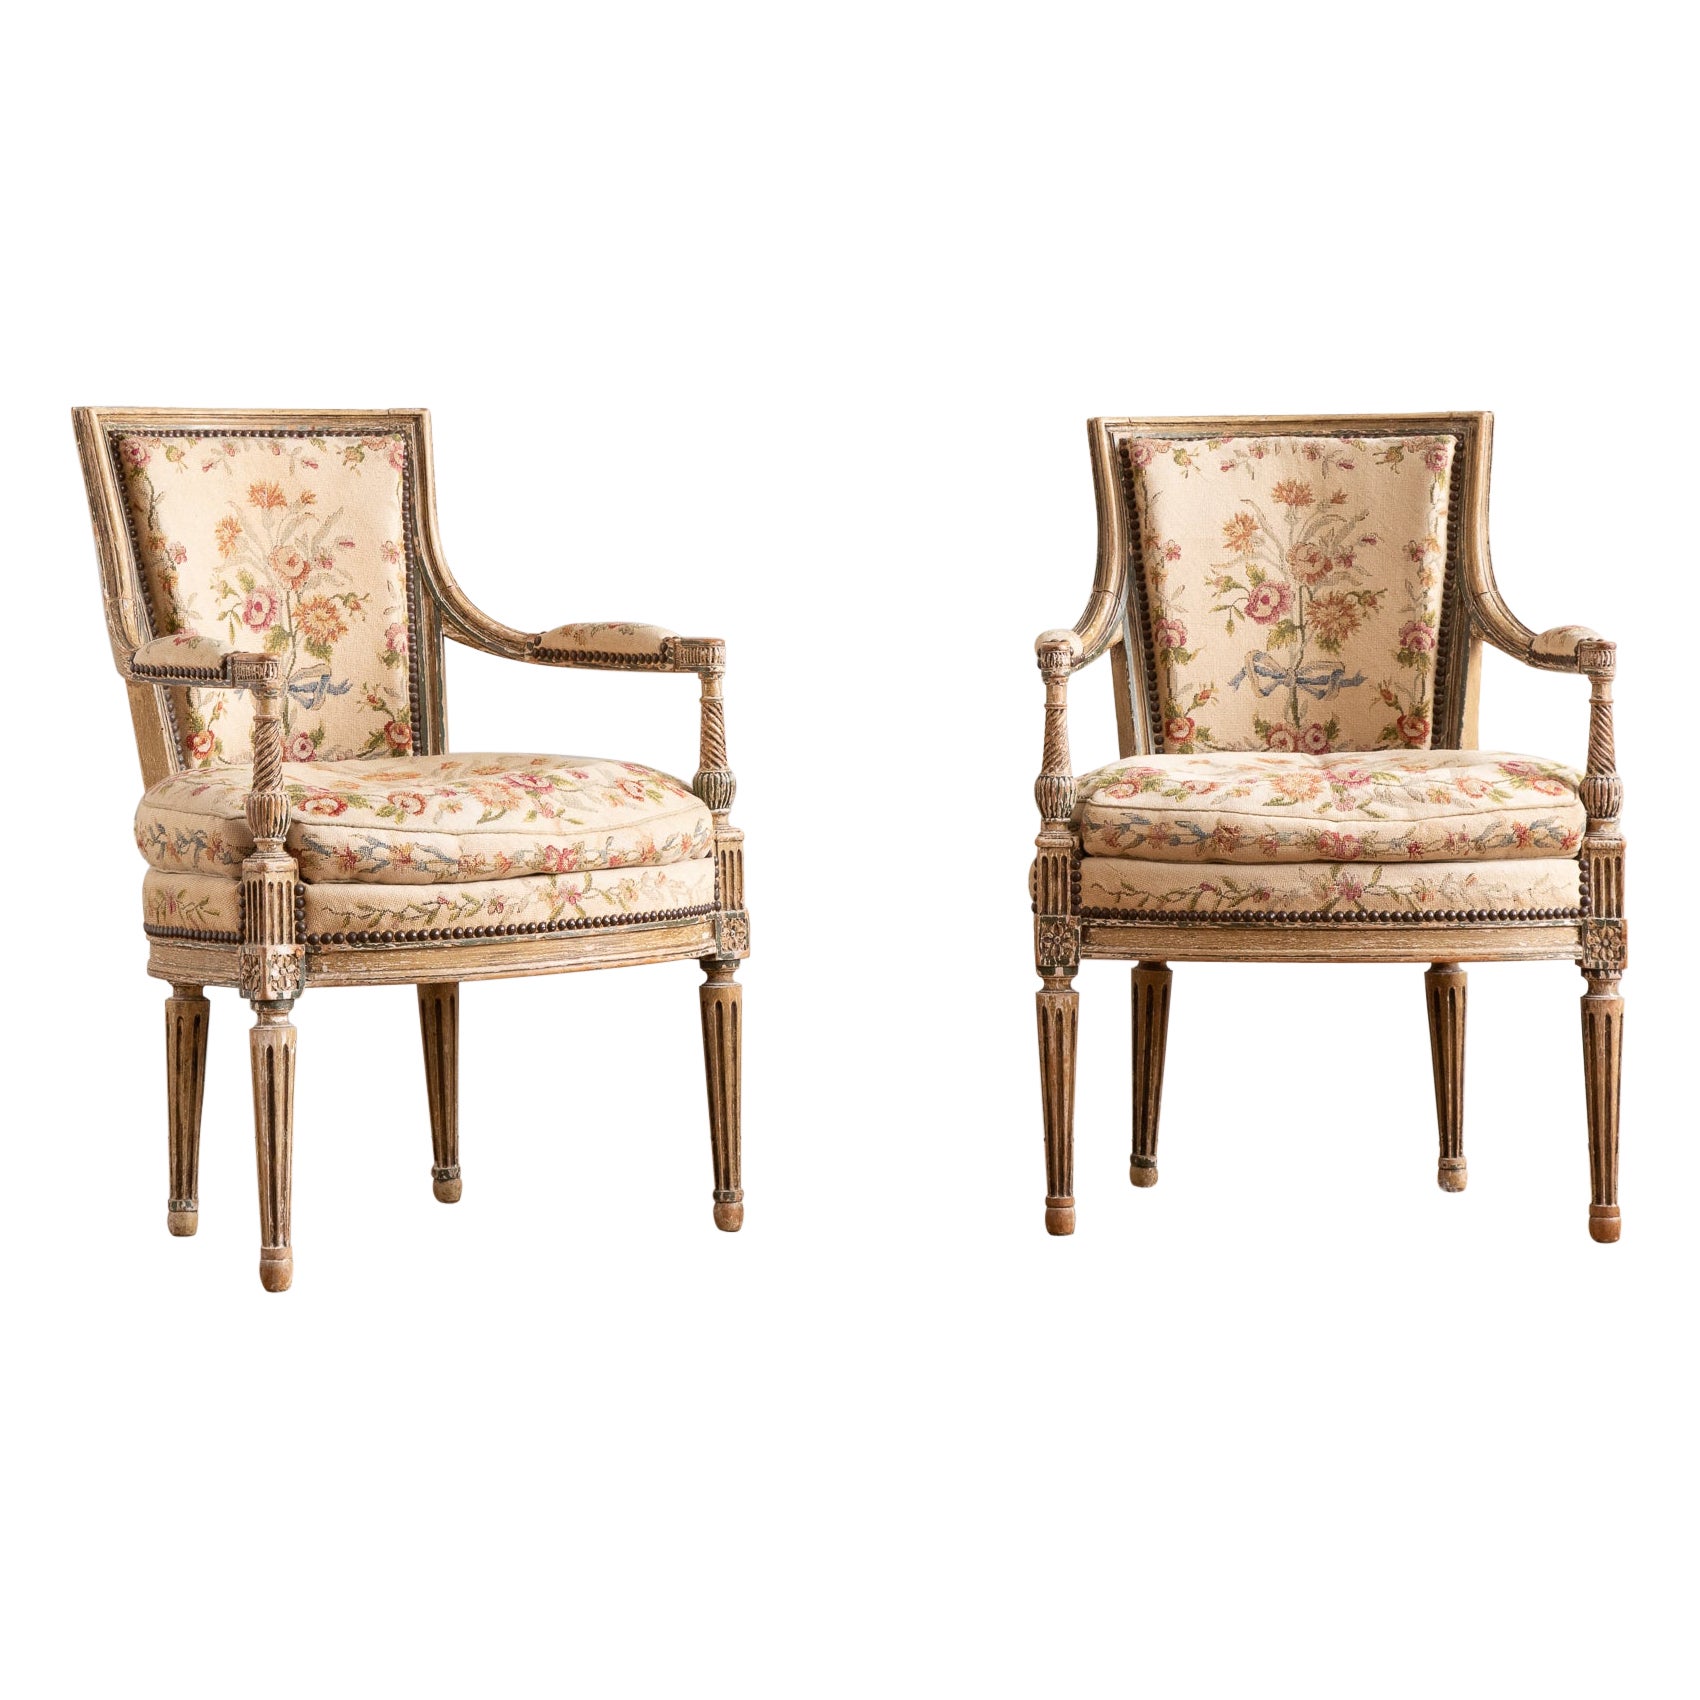 late 19th Pair of Louis XVI style Armchairs with needlepoint upholstery